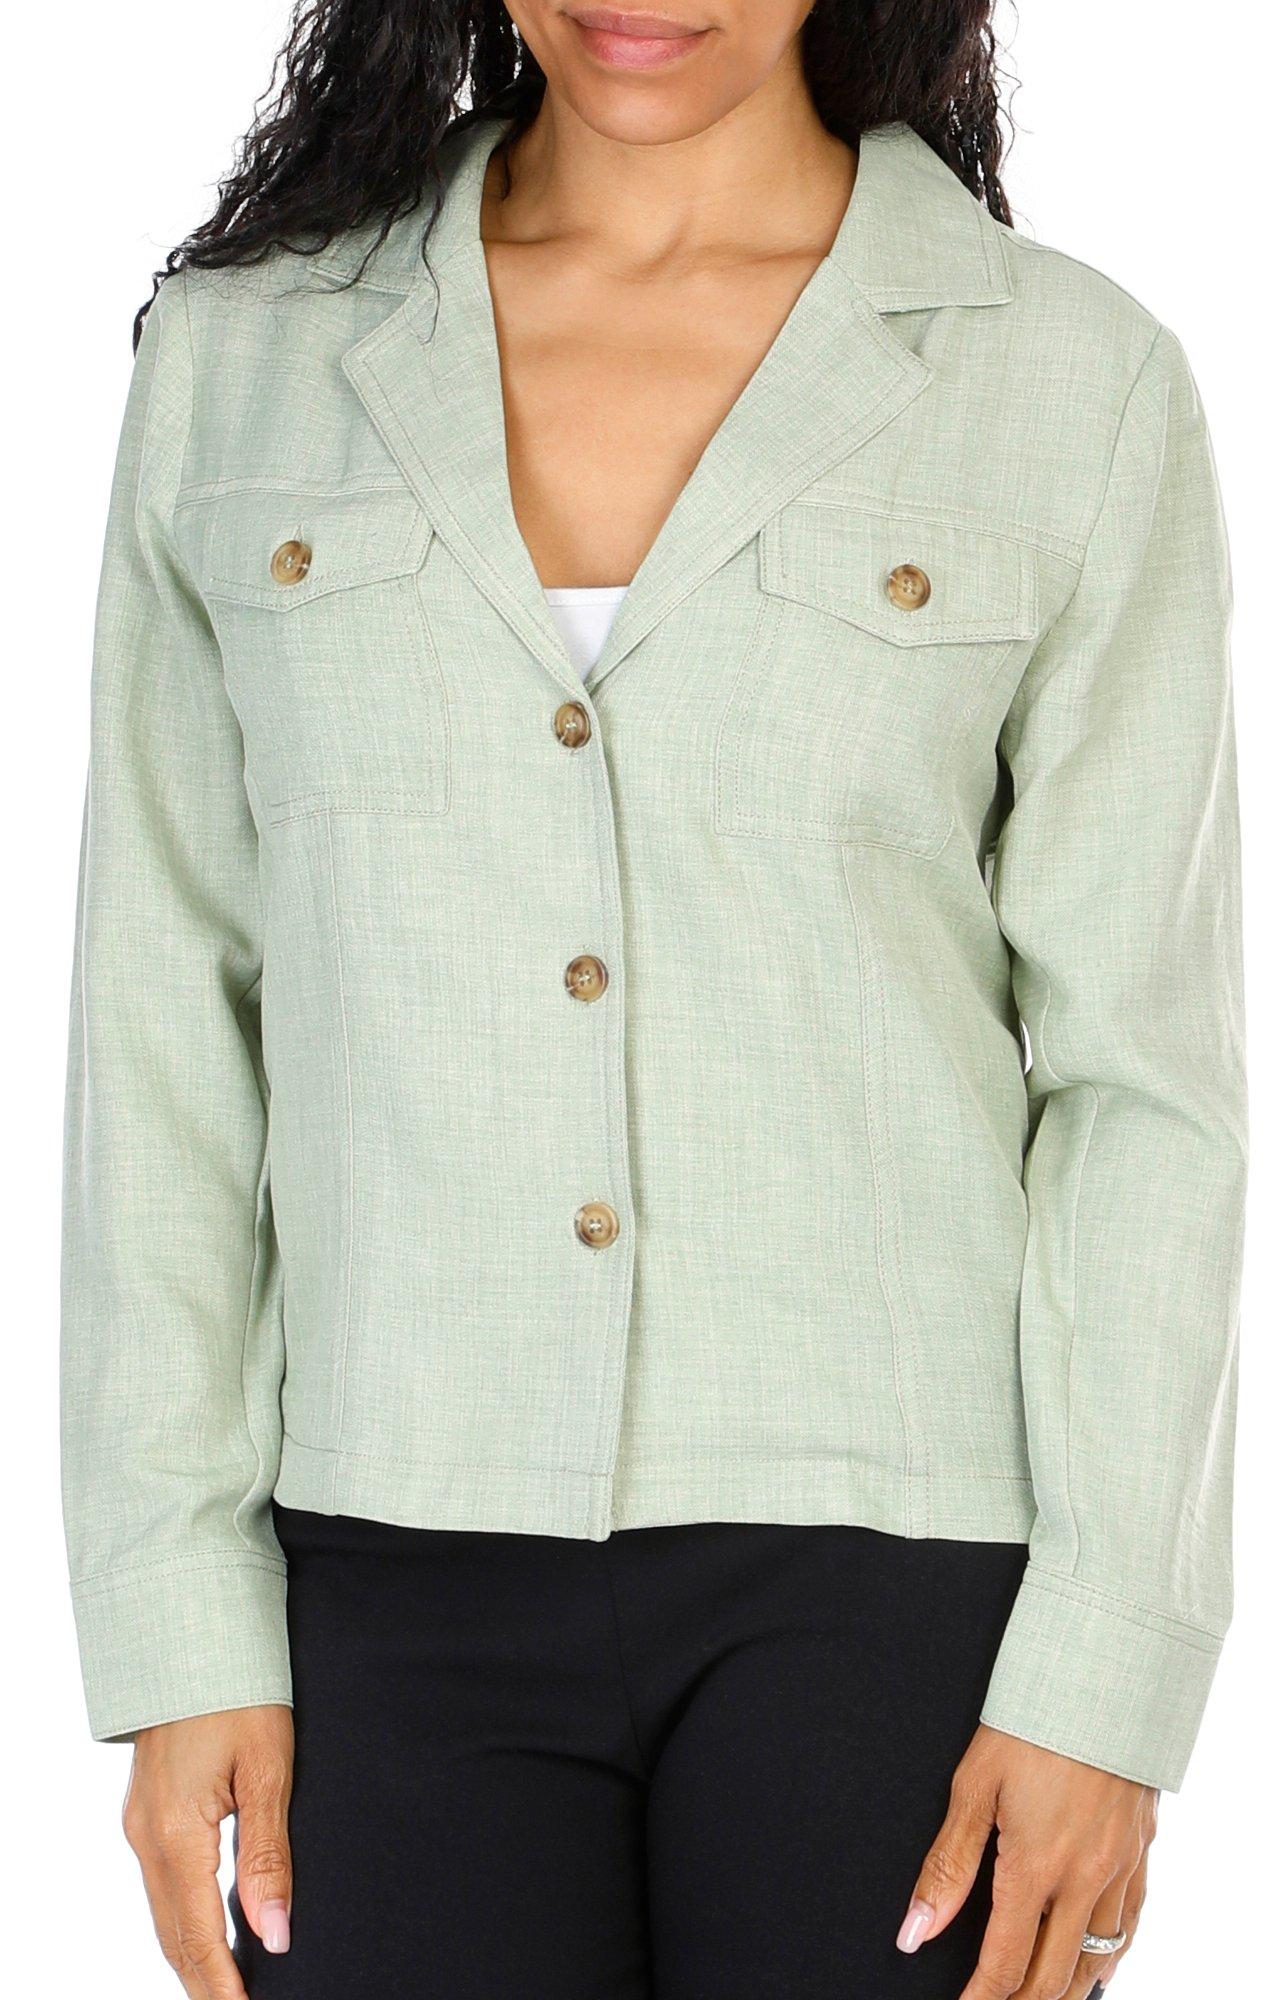 Women's Solid Button Down Jacket